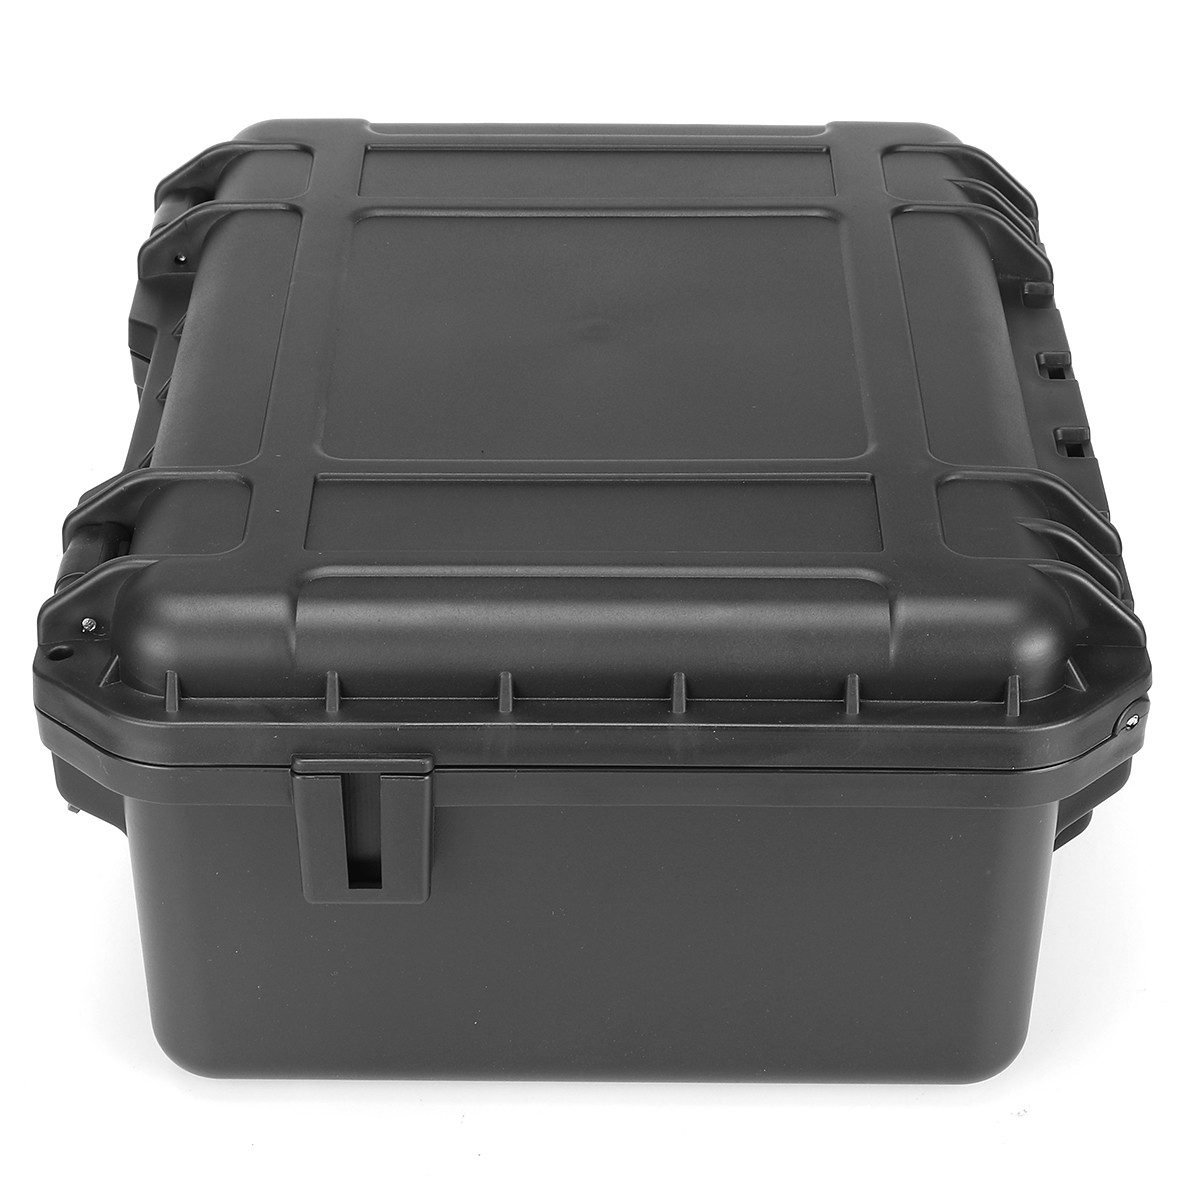 1PC-Shockproof-Sealed-Safety-Case-Toolbox-Airtight-Waterproof-Tool-Box-Instrument-Case-Dry-Box-with--1915433-14